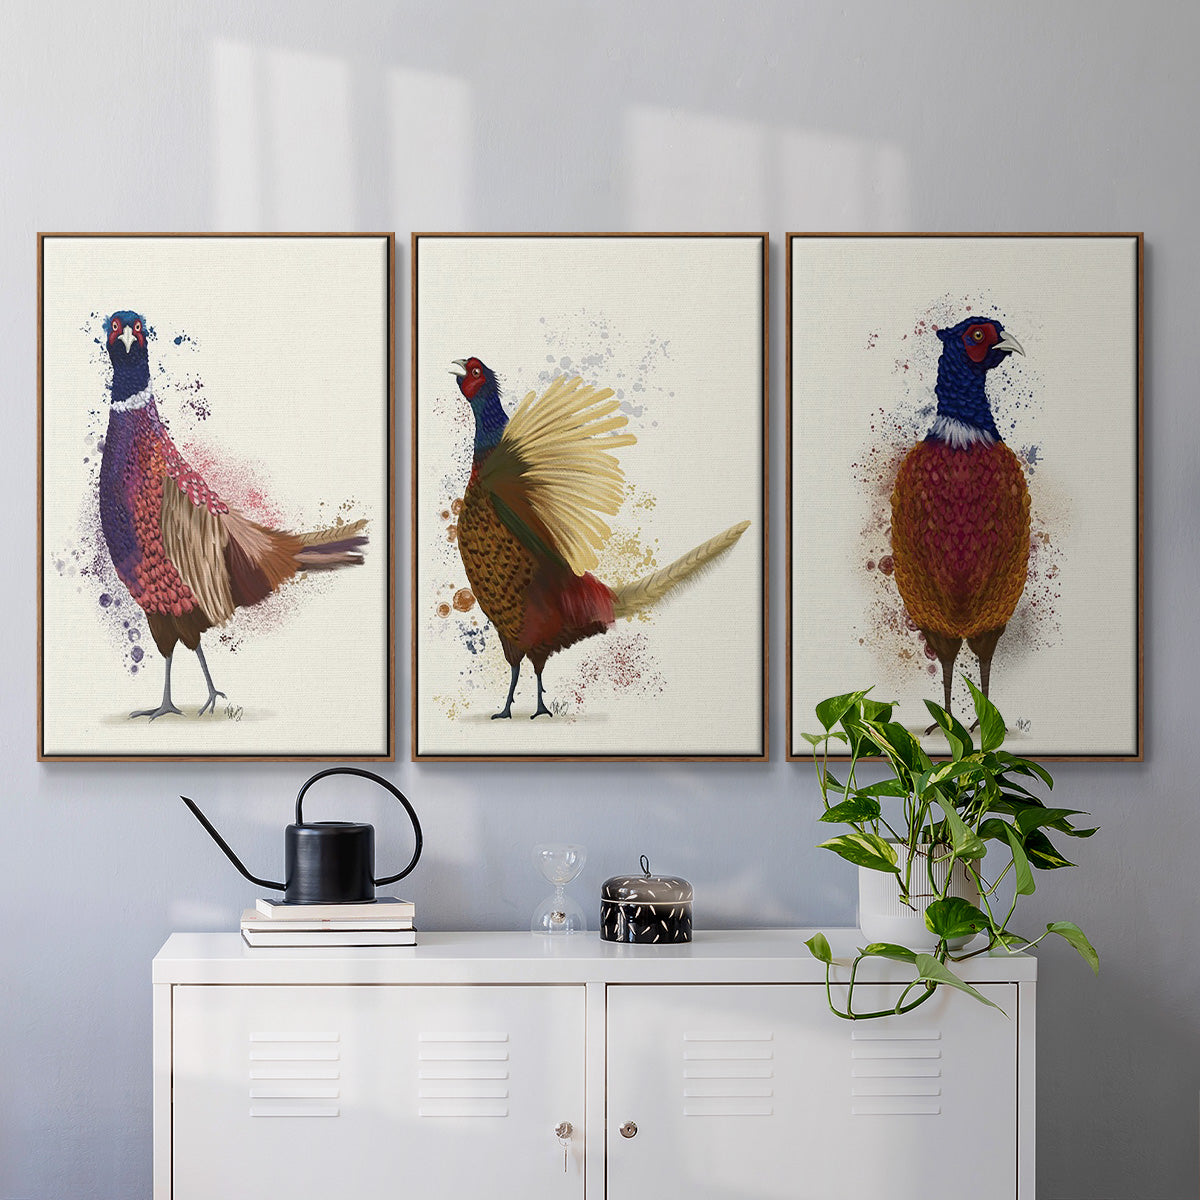 Pheasant Splash 3 - Framed Premium Gallery Wrapped Canvas L Frame 3 Piece Set - Ready to Hang